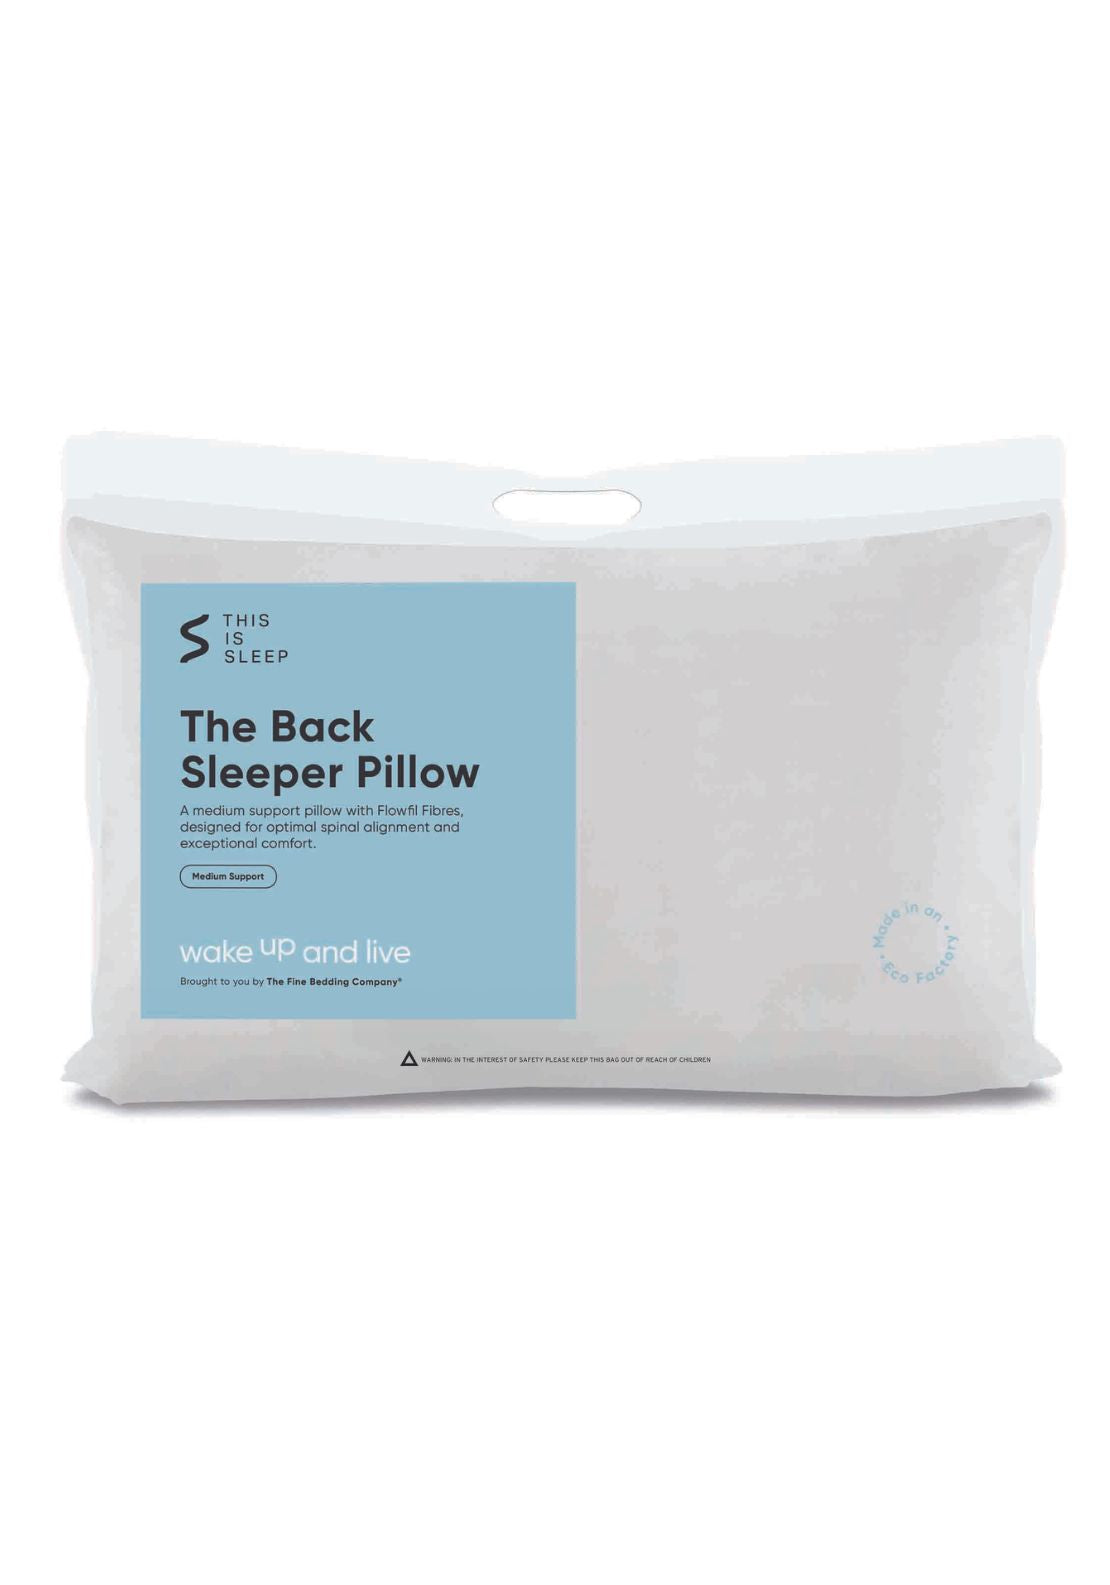 The Fine Bedding Company Back Sleeper Pillow 1 Shaws Department Stores